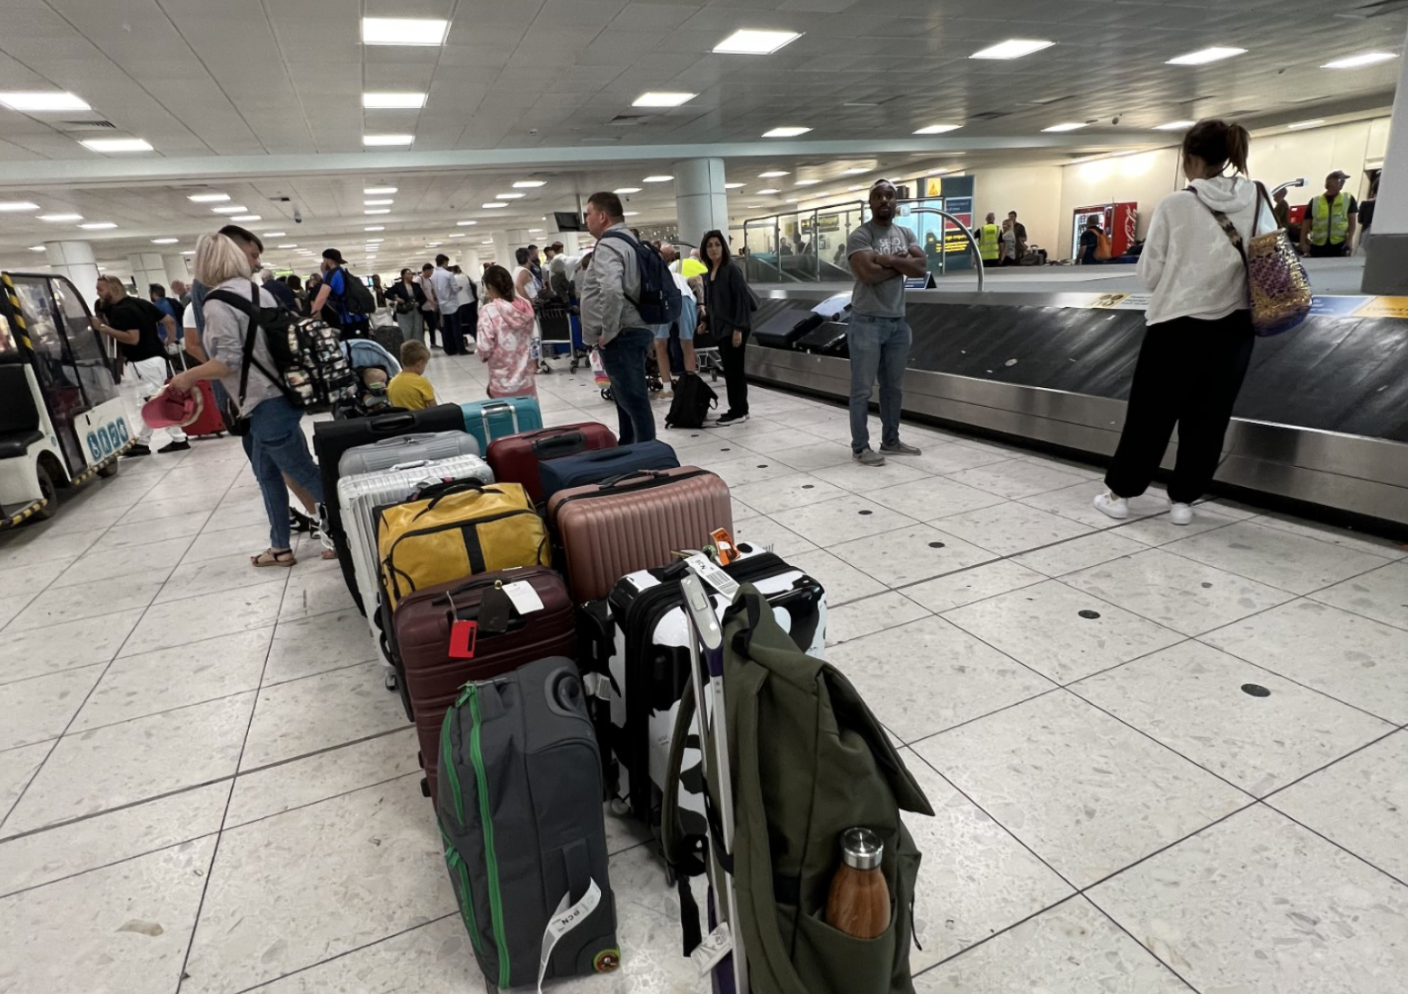 There was “chaos as the baggage collection” at Gatwick, one passenger said